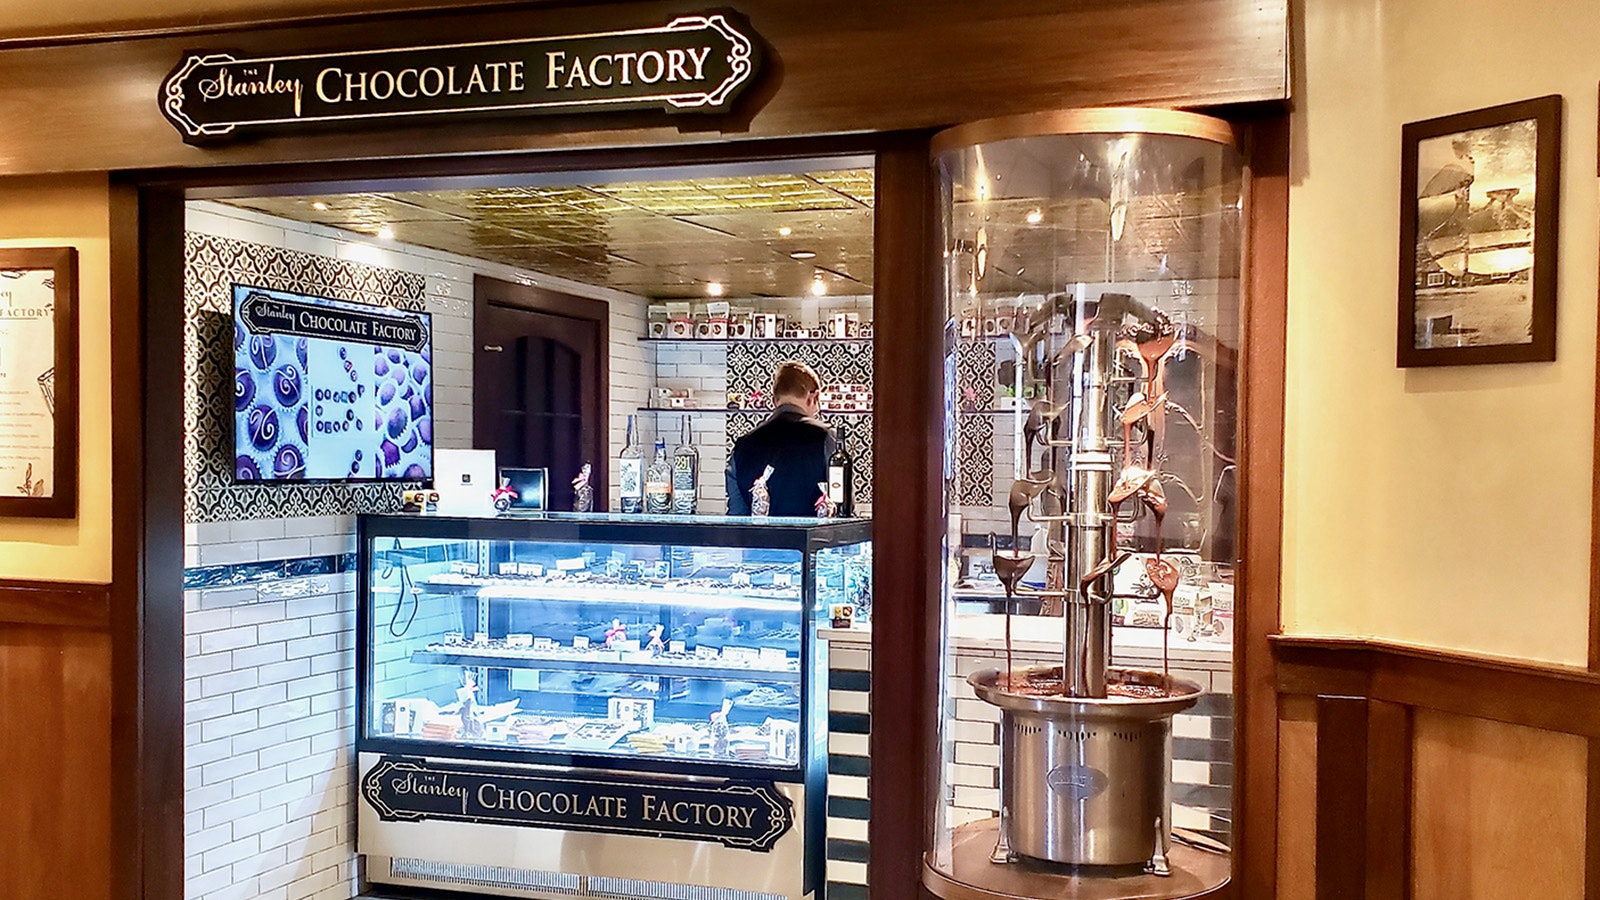 The Stanley Chocolate Factory doesn't make any of its own chocolates, they're made by Lift Chocolates.